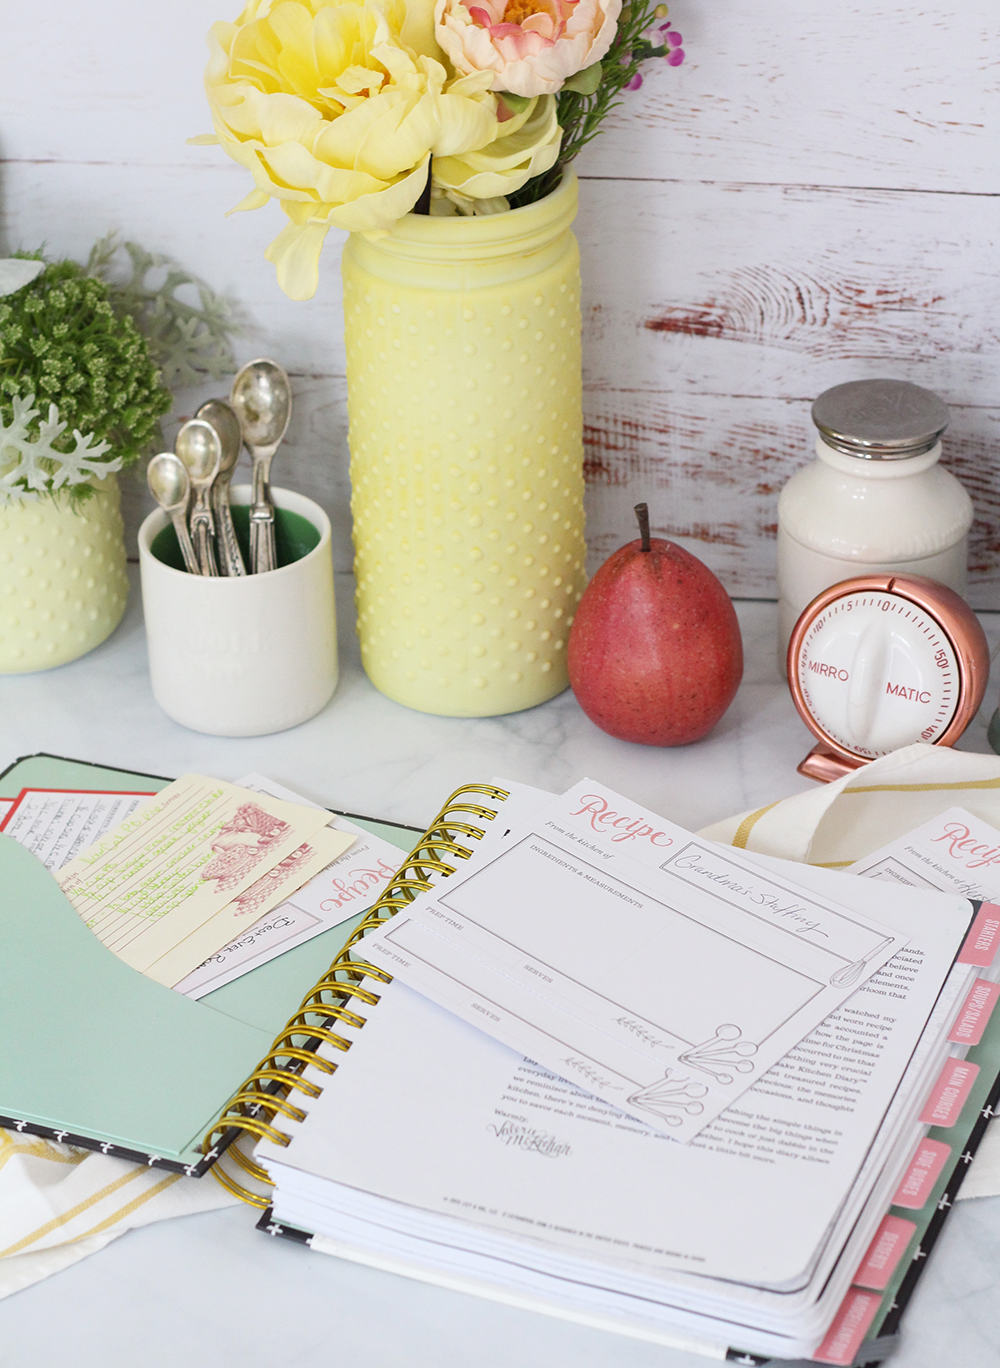 The Keepsake Kitchen Diary is a recipe journal combined with a recipe keeper for recording precious family recipes